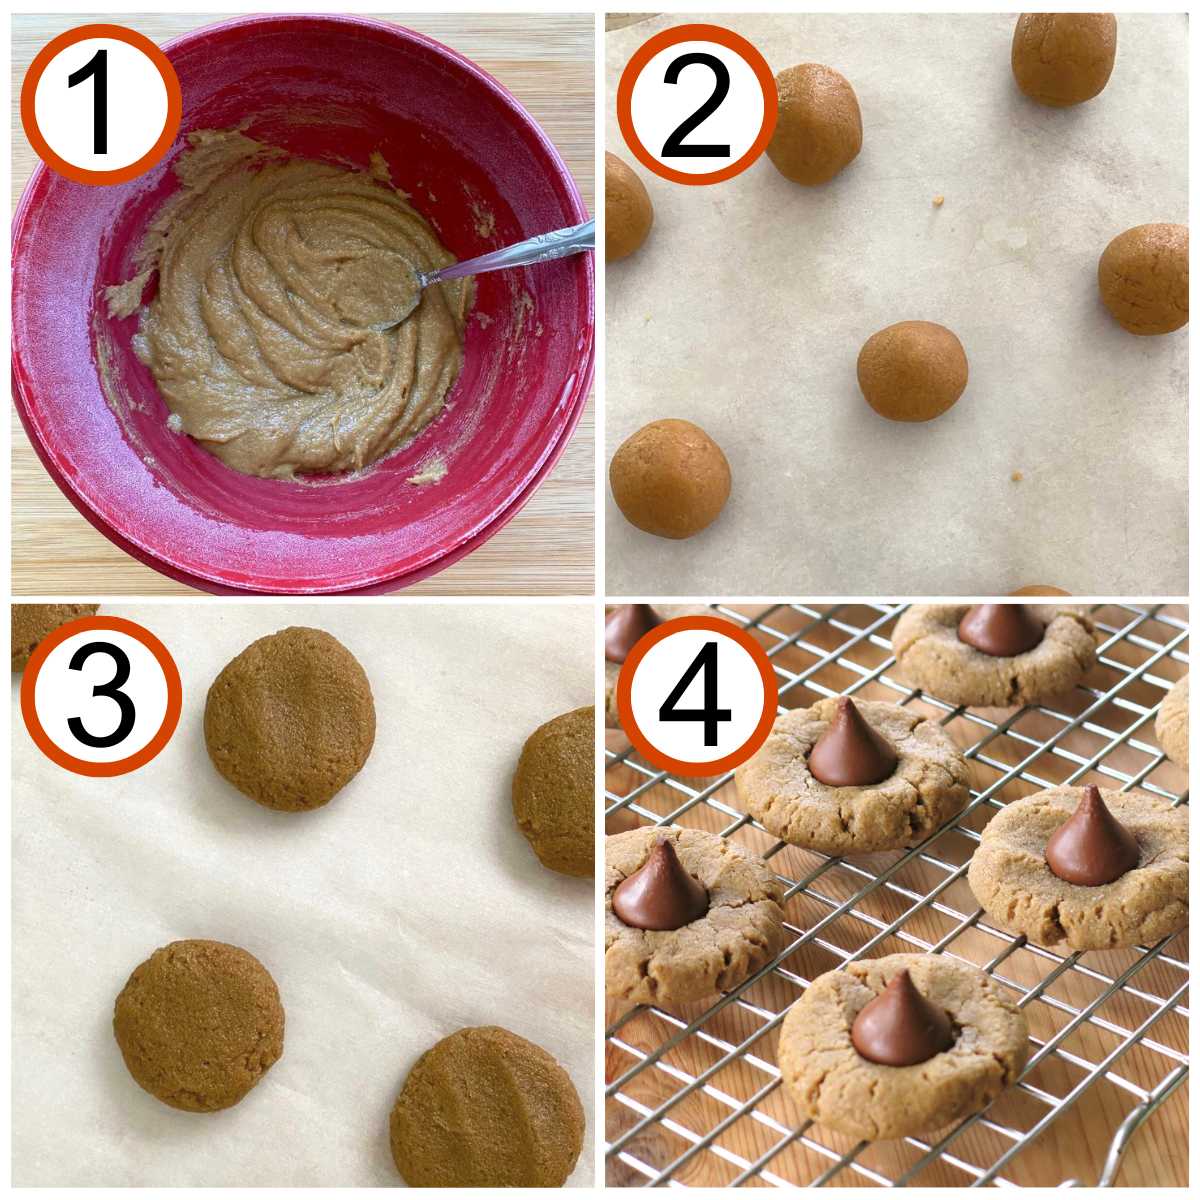 Collage of steps to make peanut butter blossom cookies: 1) Dough in bowl. 2) Balls of dough on baking sheet. 3) Flatten cookies after partially cooking. 4) Kisses on cookies that are on a wire rack.